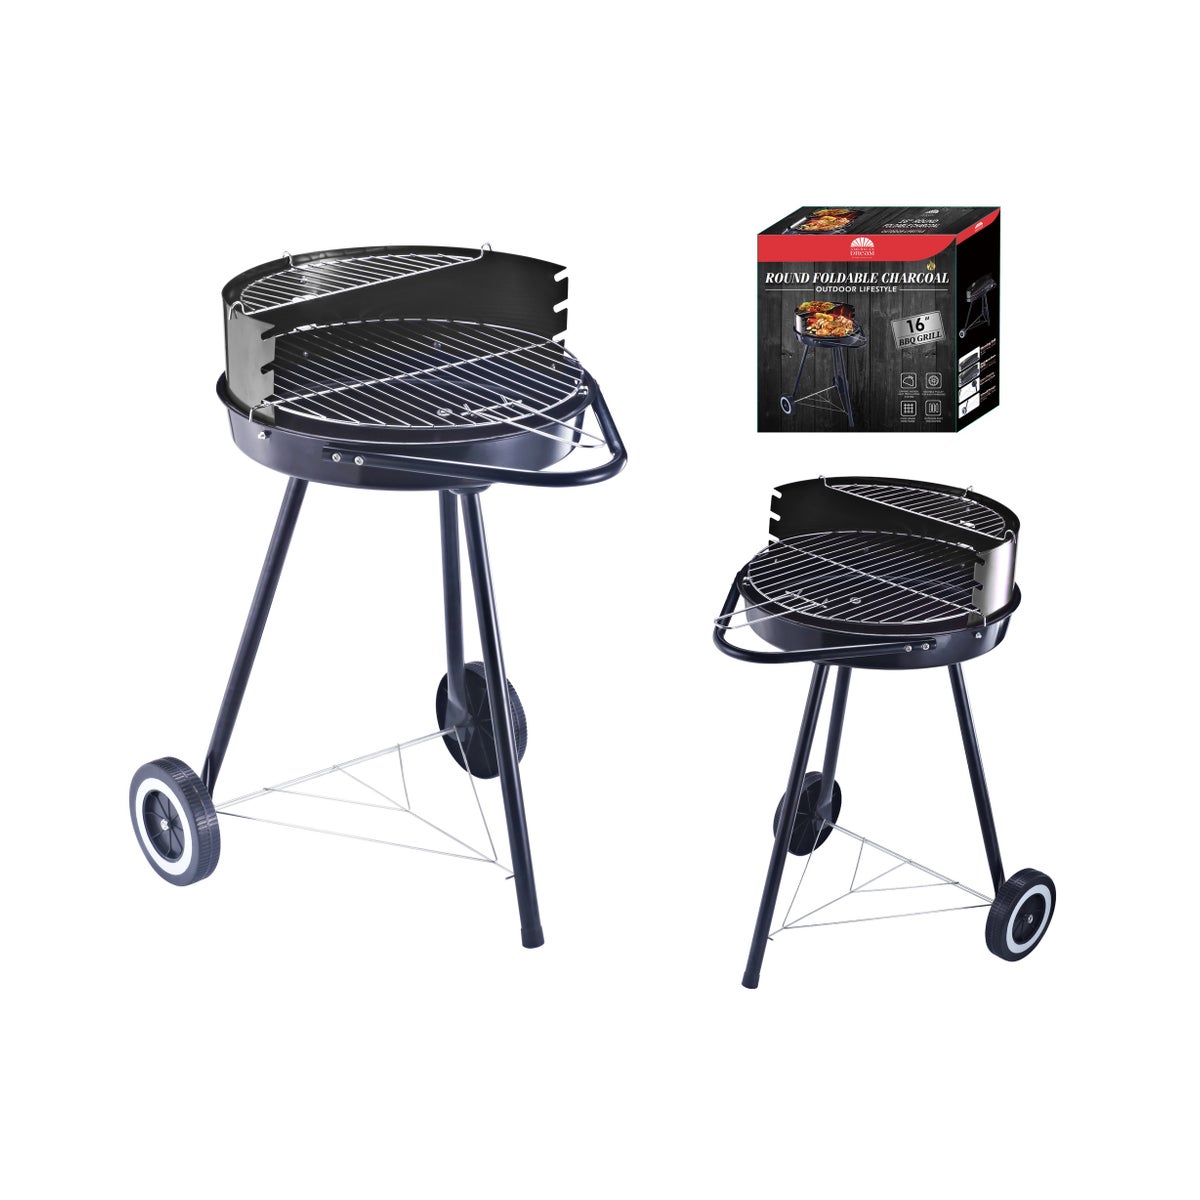 16" Round Foldable Charcoal BBQ Grill (1)